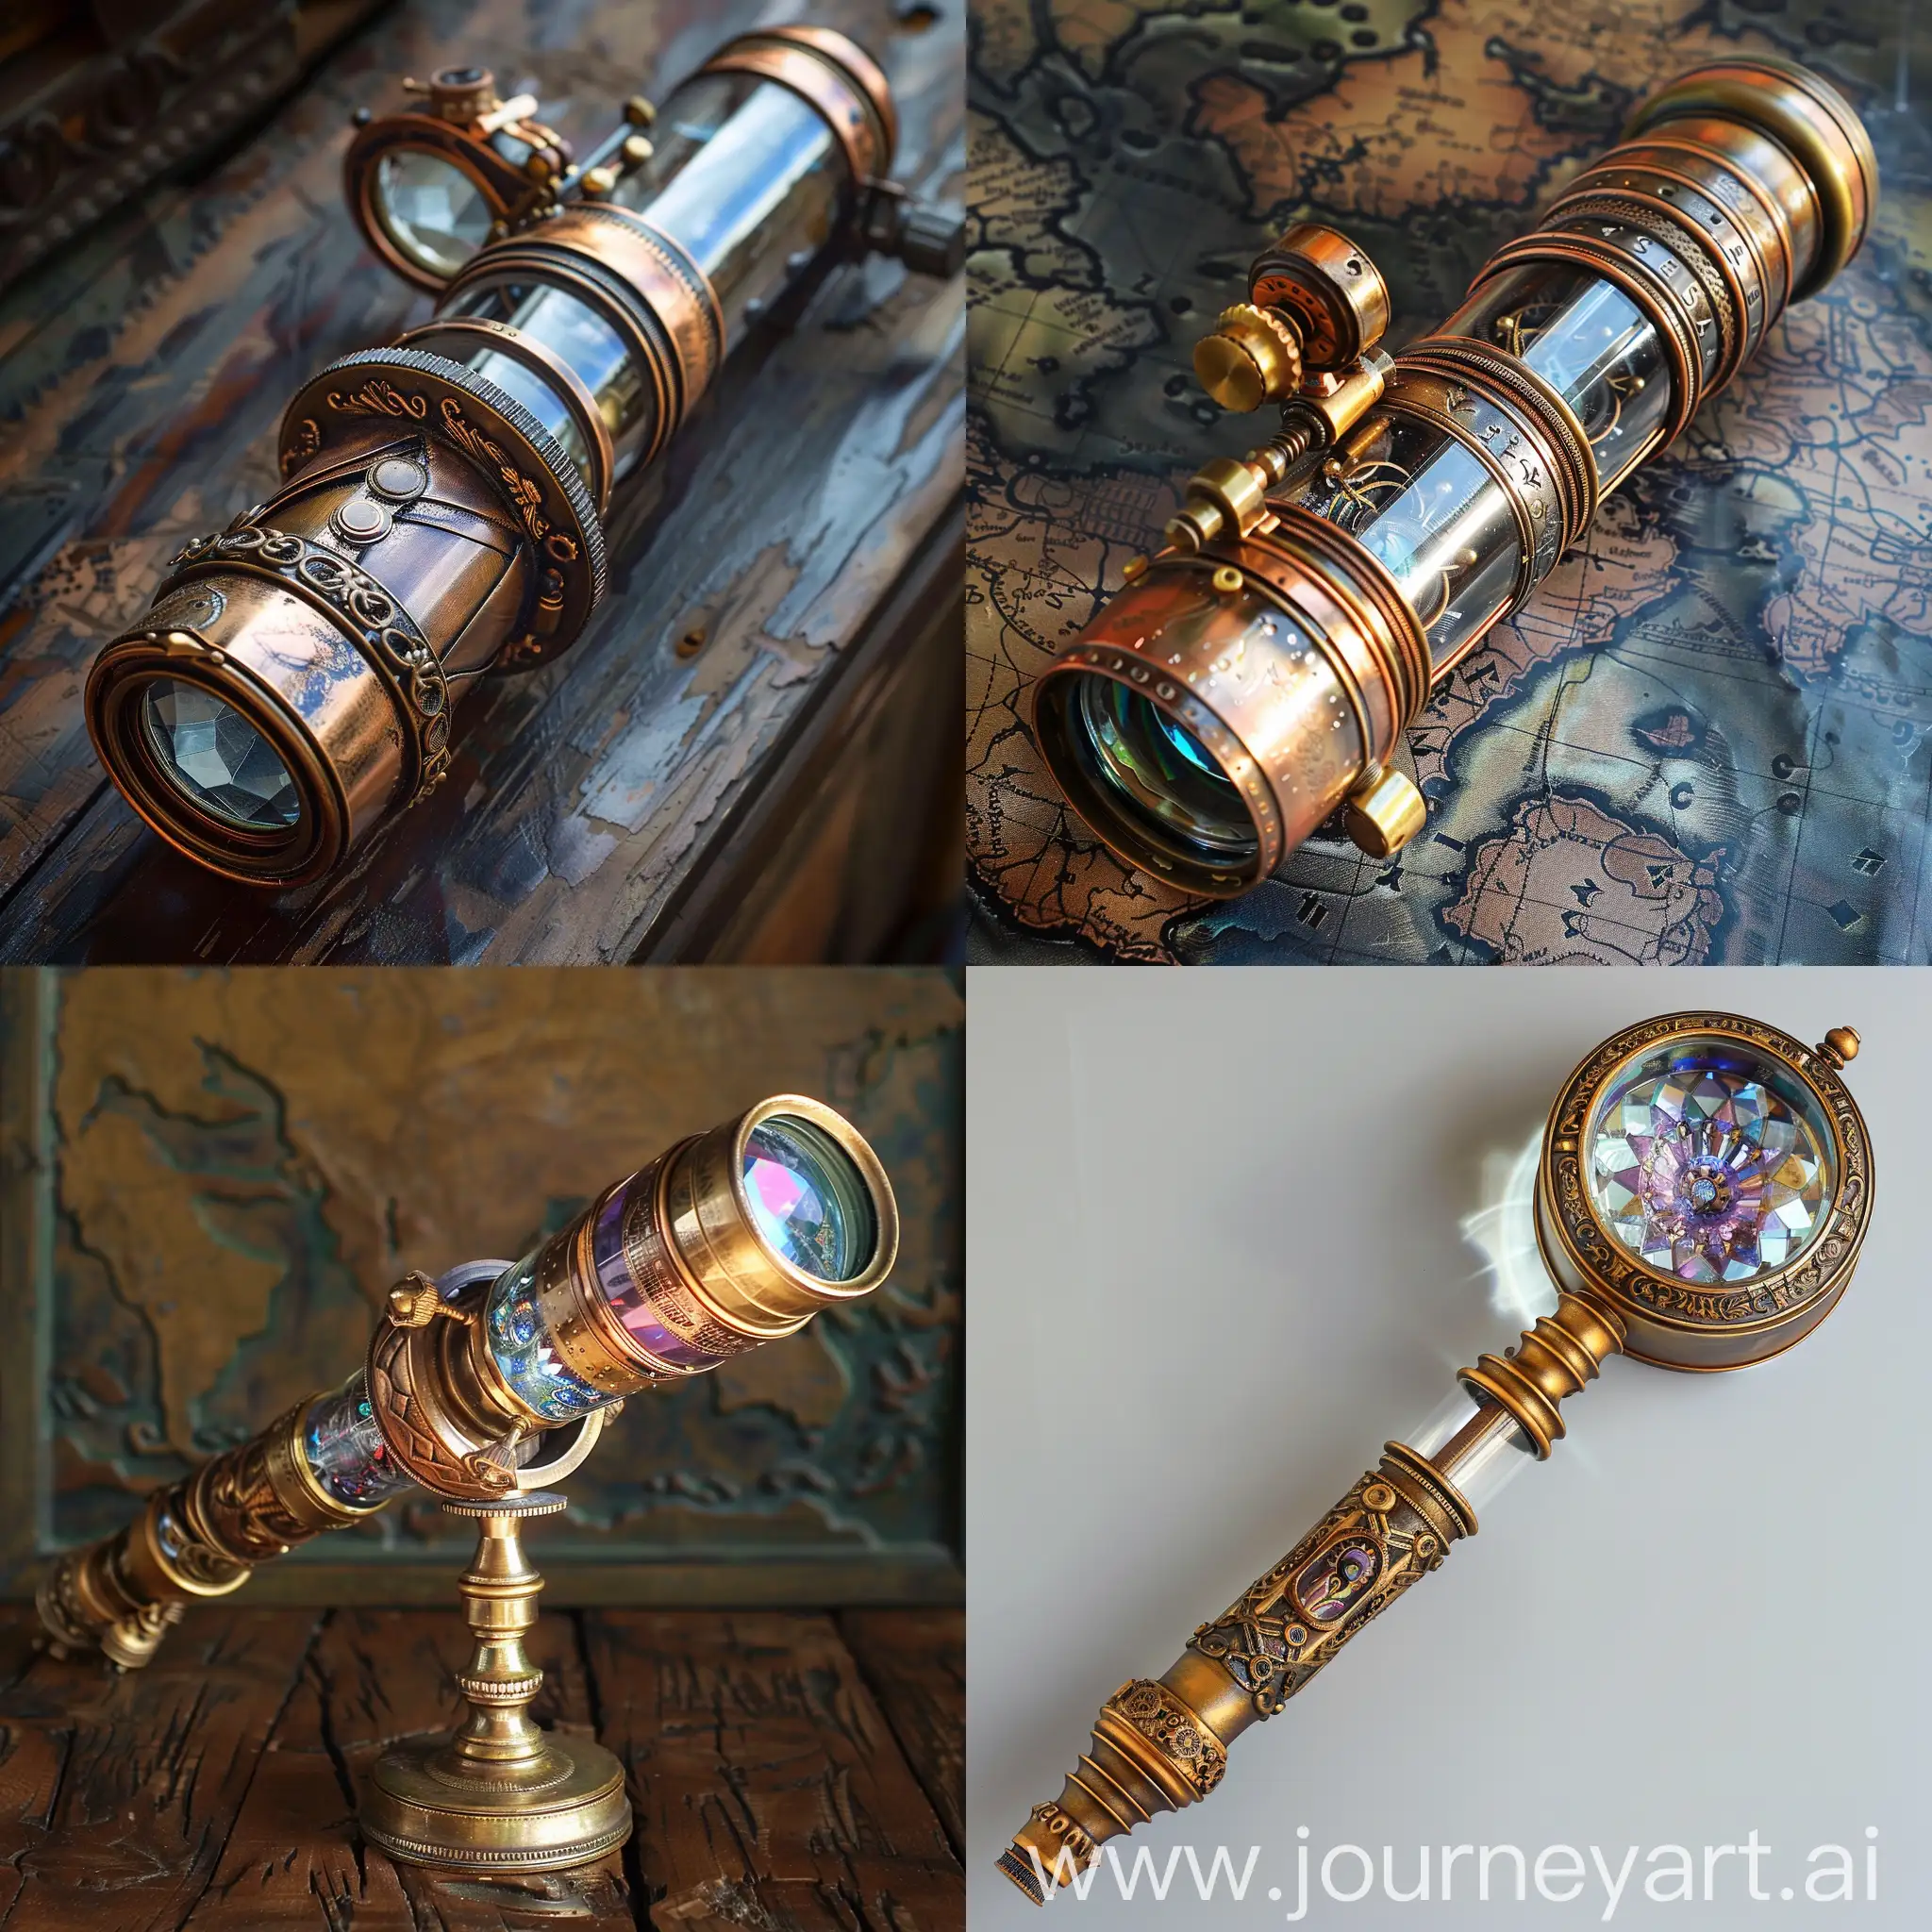 Steampunk-Kaleidoscope-and-Spyglass-with-Intricate-Gears-and-Brass-Finish